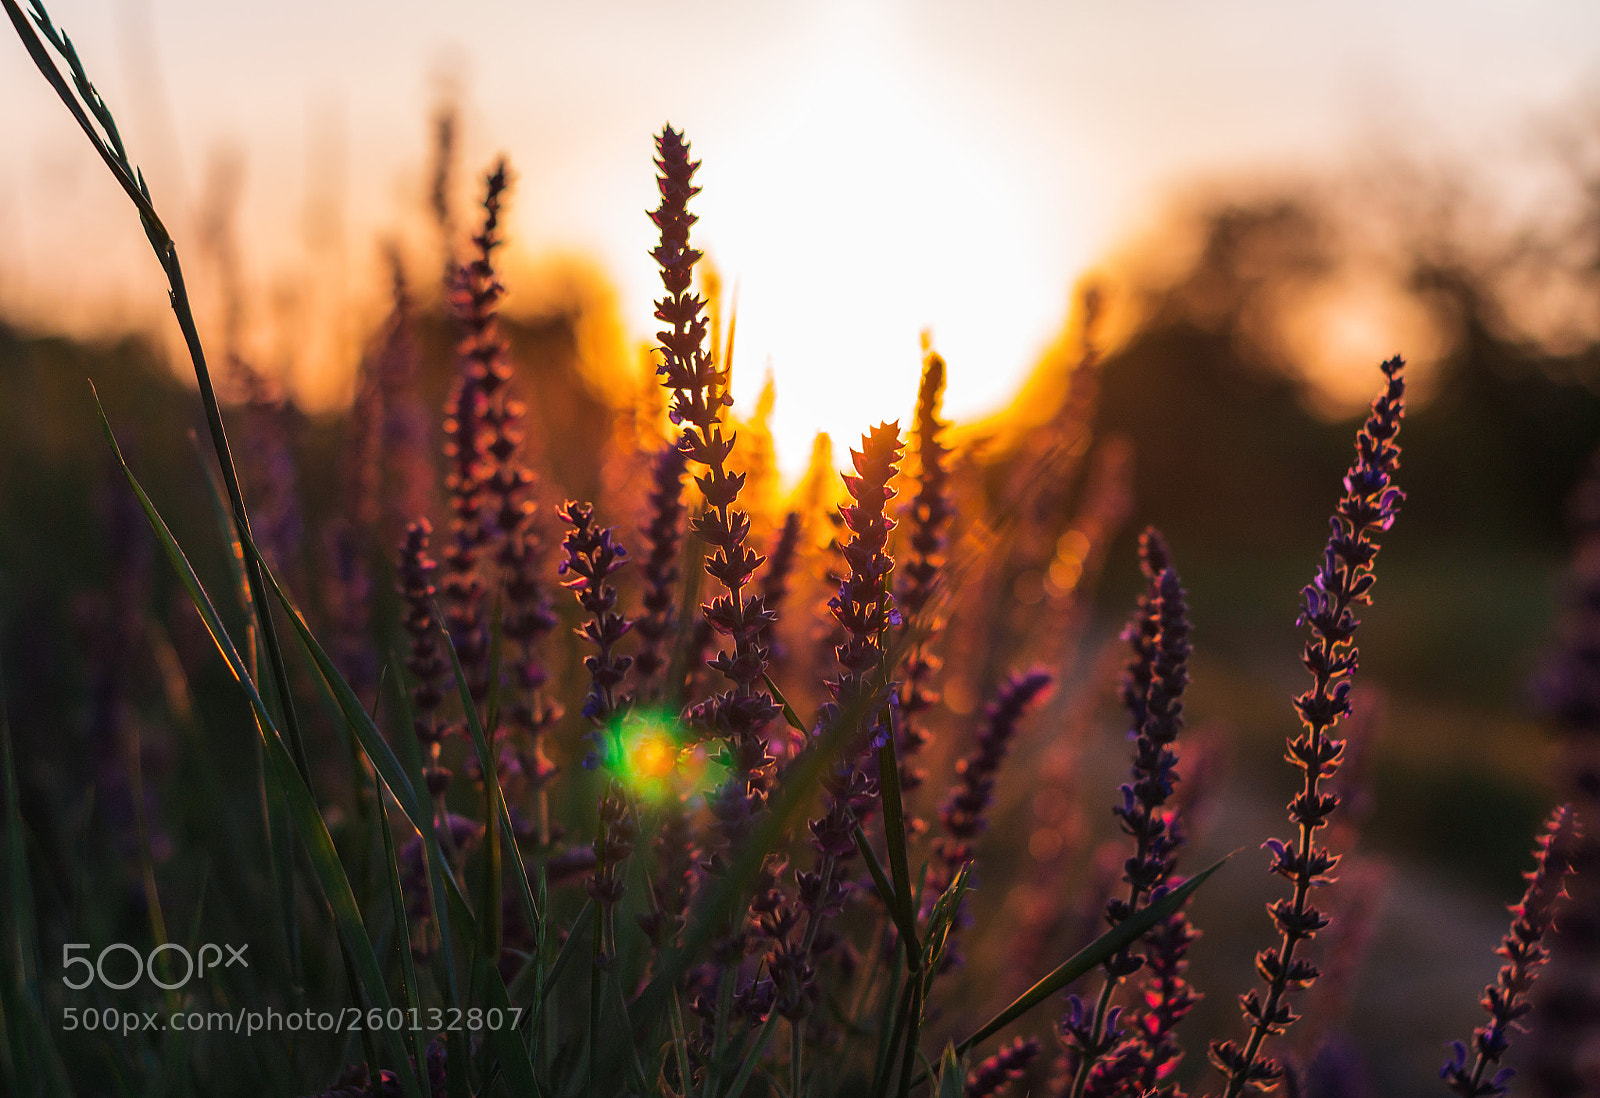 Nikon D3100 sample photo. Sunset and flowers photography